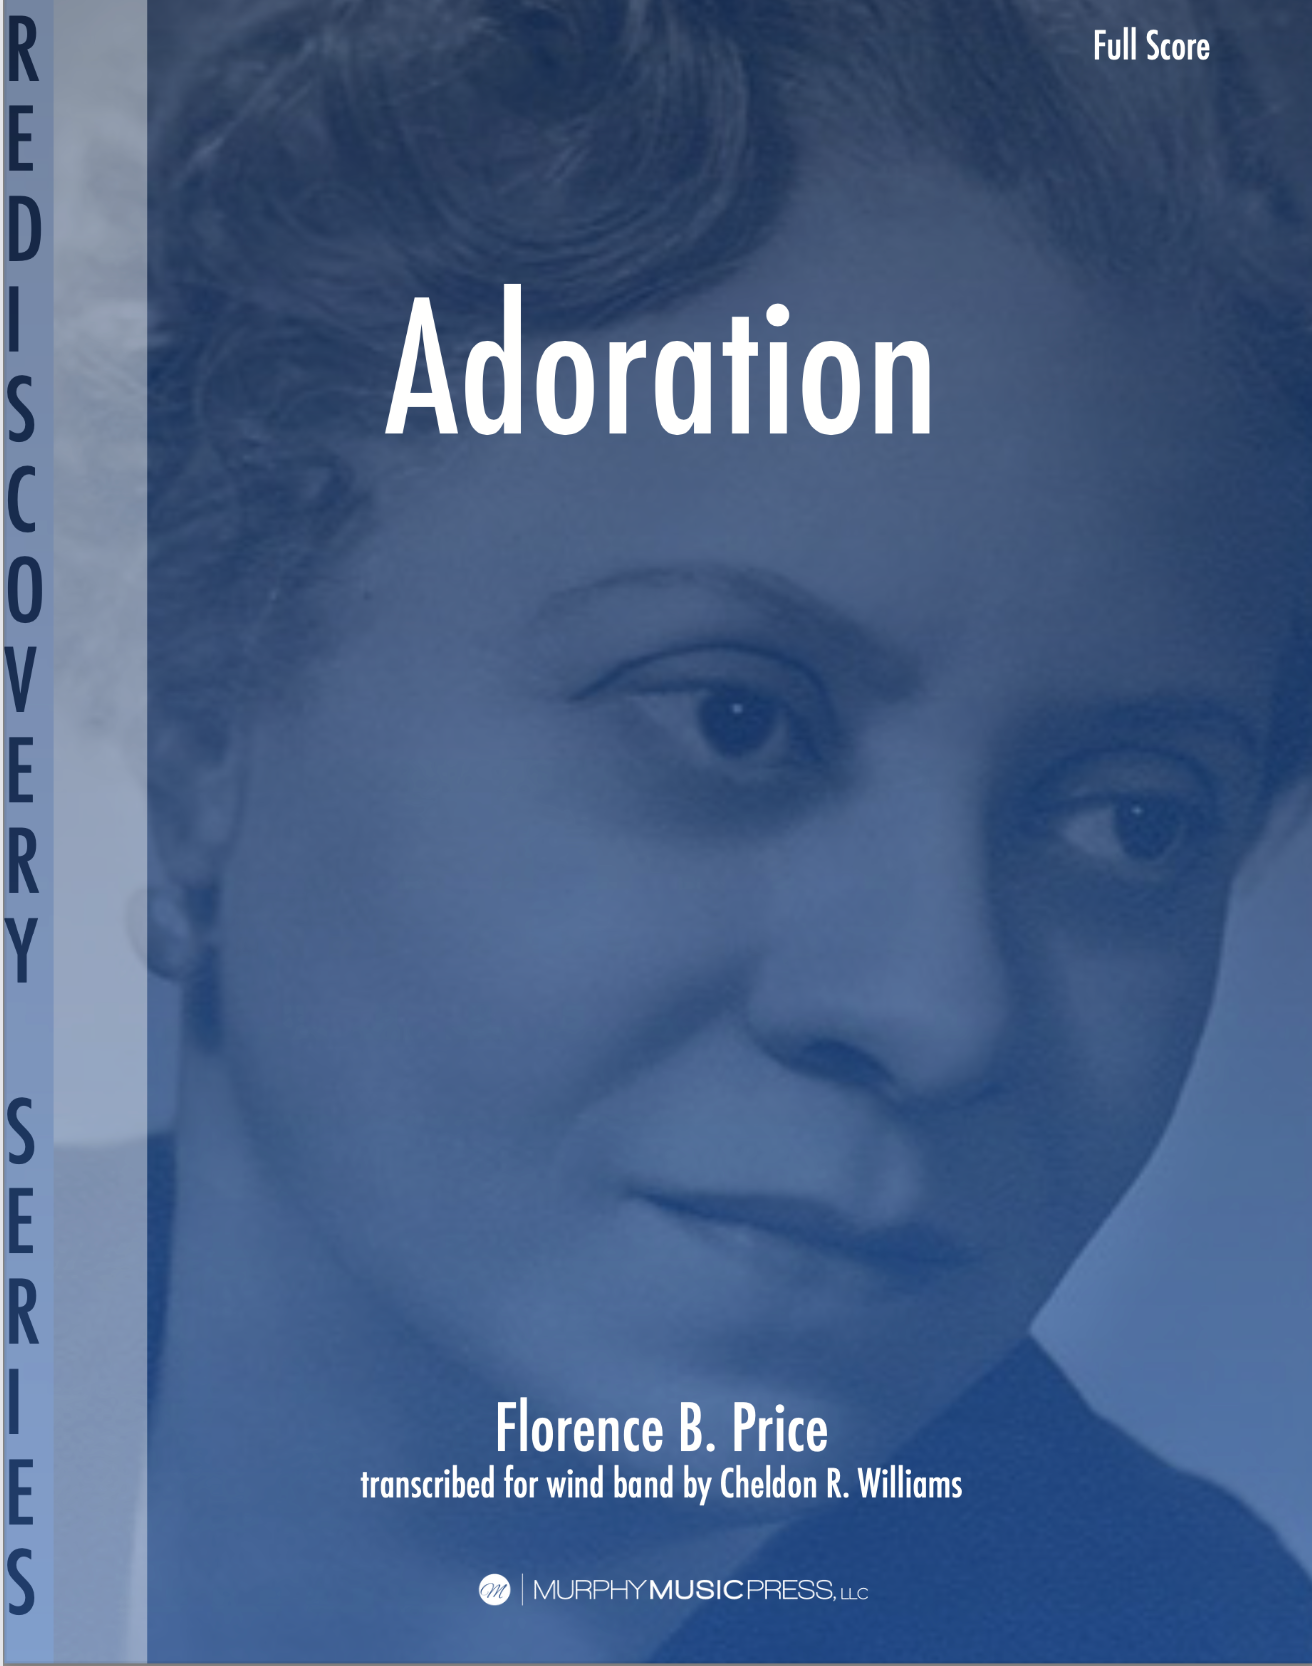 Adoration (Score Only) by Price, arr. Cheldon R. Williams